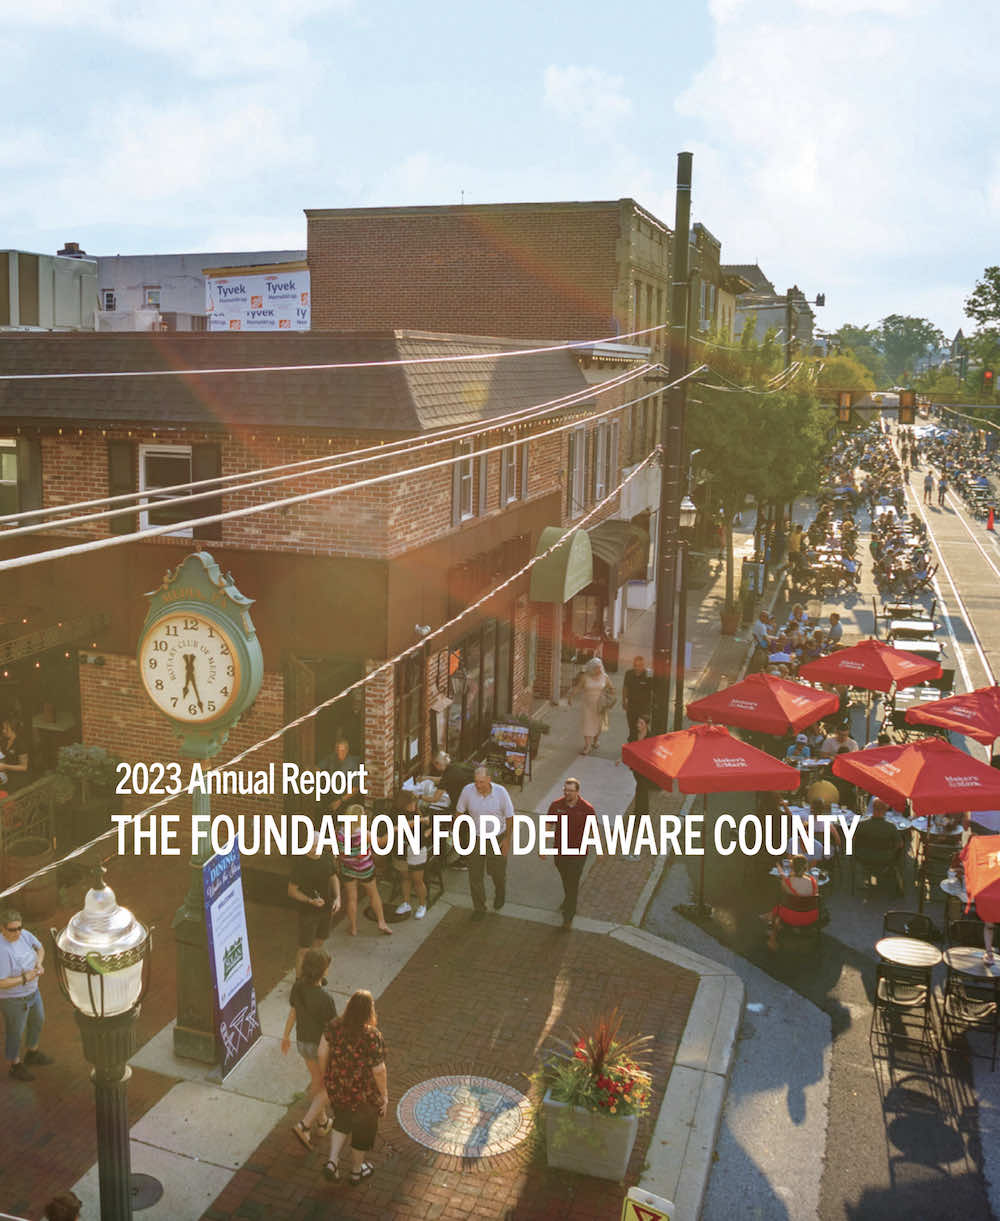 The Foundation for Delaware County Annual Report 2023